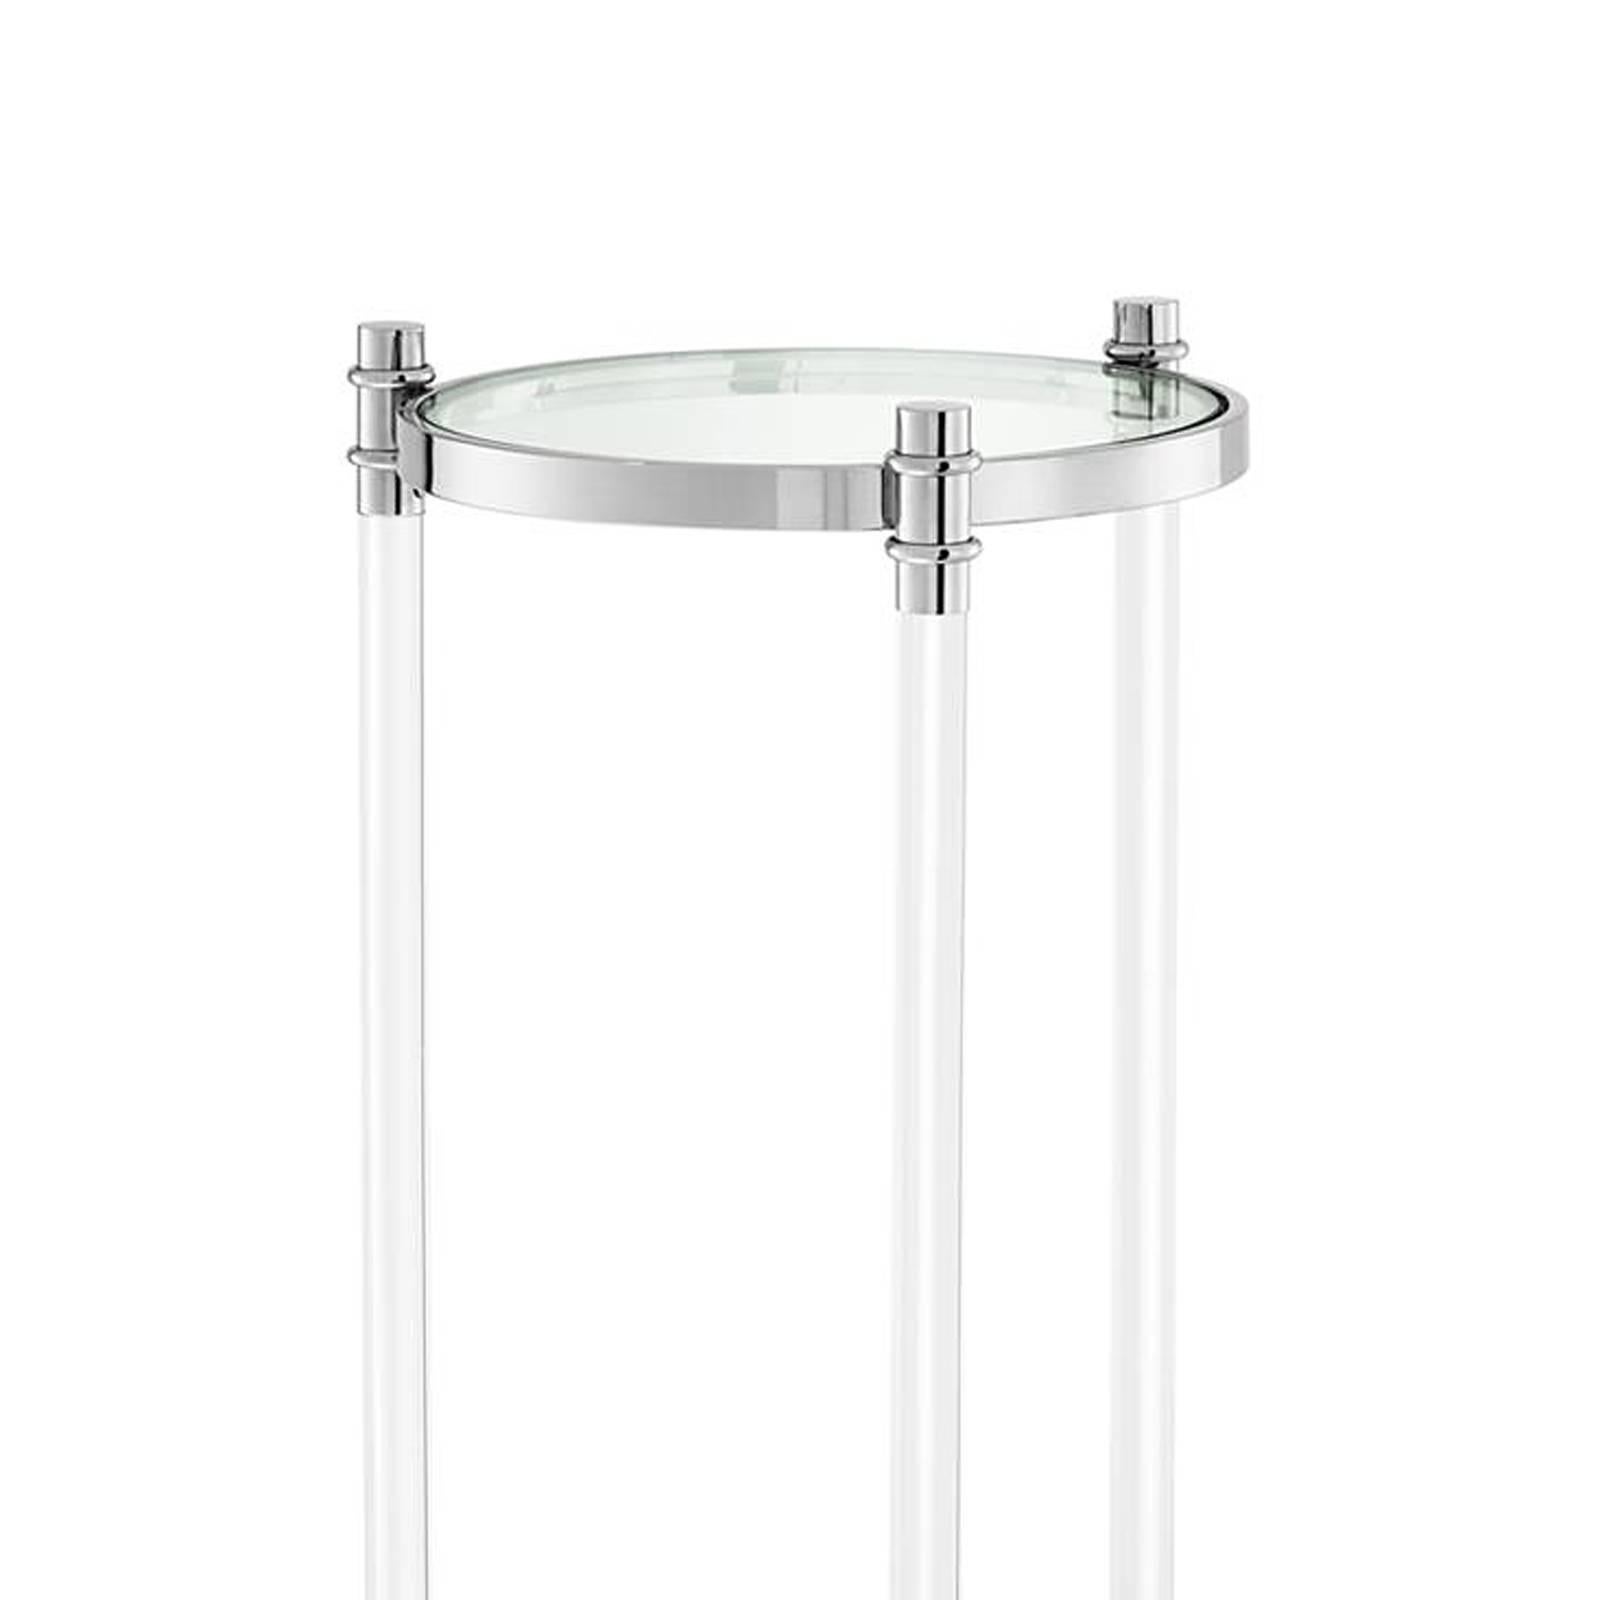 Colomn Tertio with polished stainless steel 
structure, clear glass top and clear acrylic feet.
Also available in cabinet, coffee table and side table.
